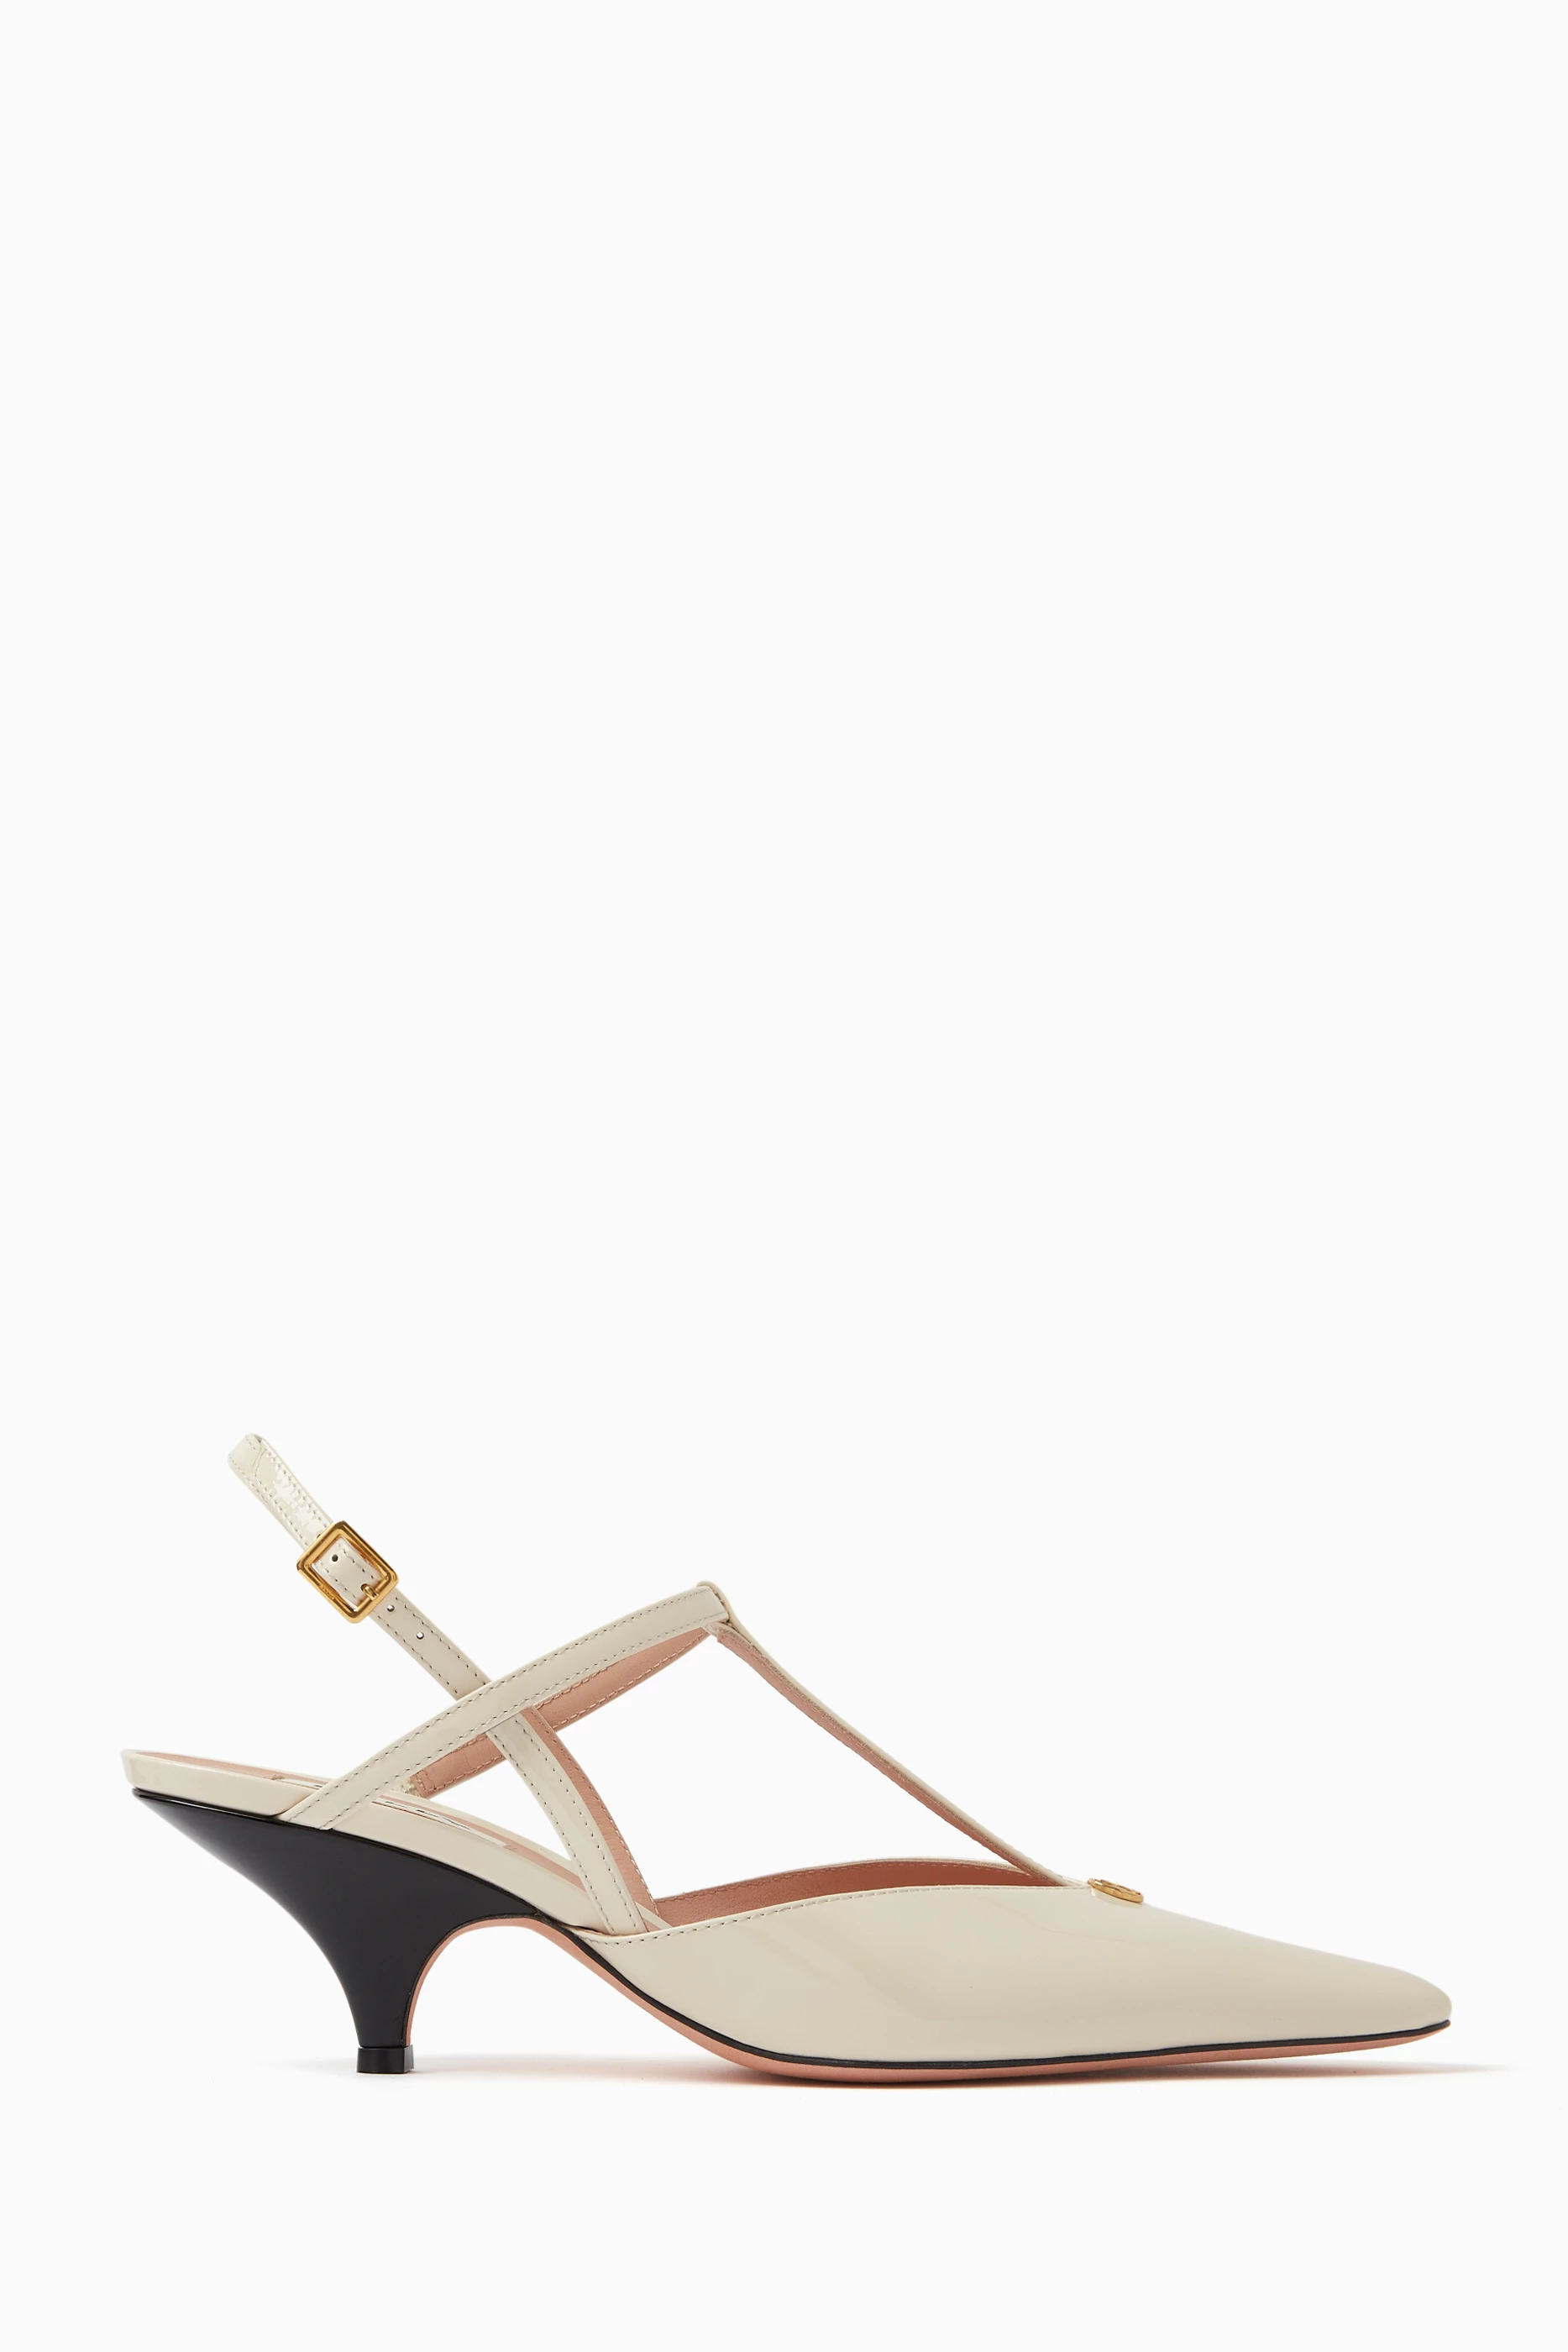 Buy Bally Neutral Karline 55 Slingback Pumps in Leather for WOMEN